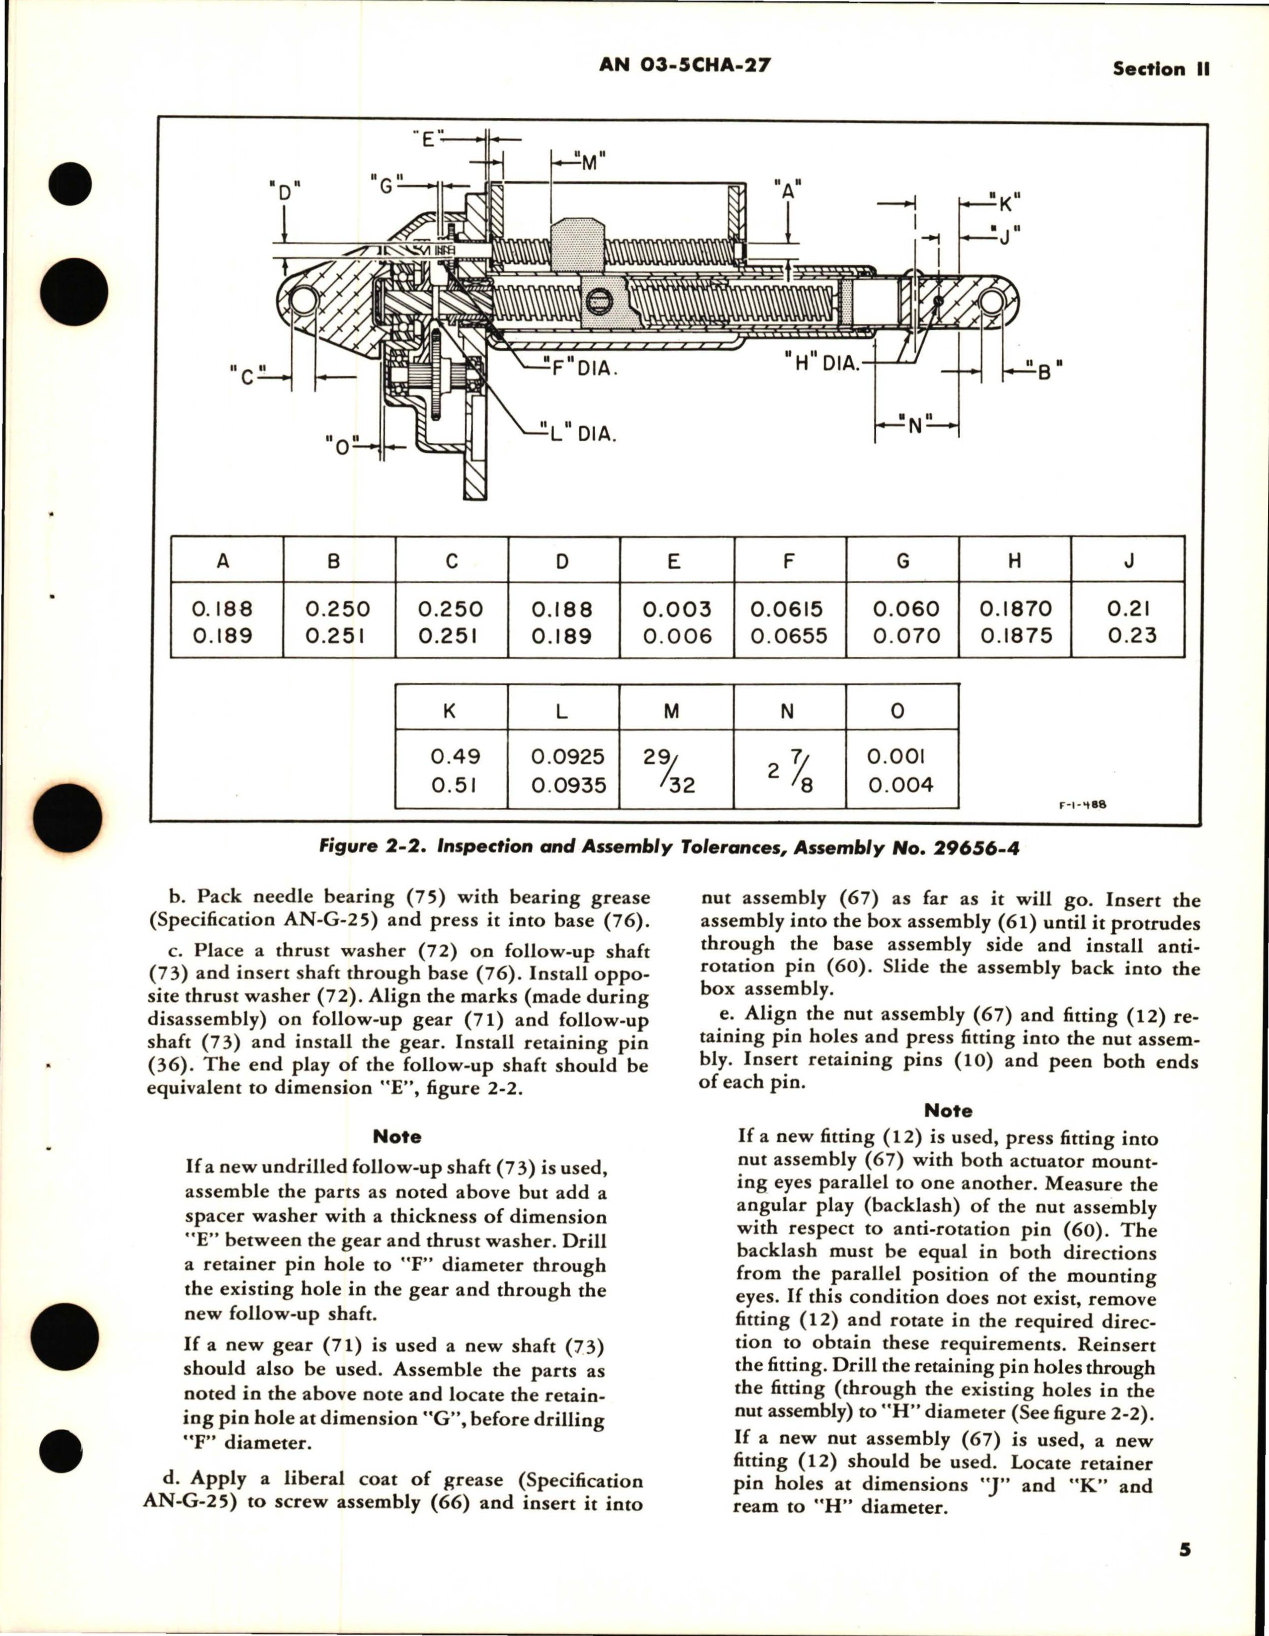 Sample page 7 from AirCorps Library document: Overhaul Instructions for Electromechanical Linear Actuators 